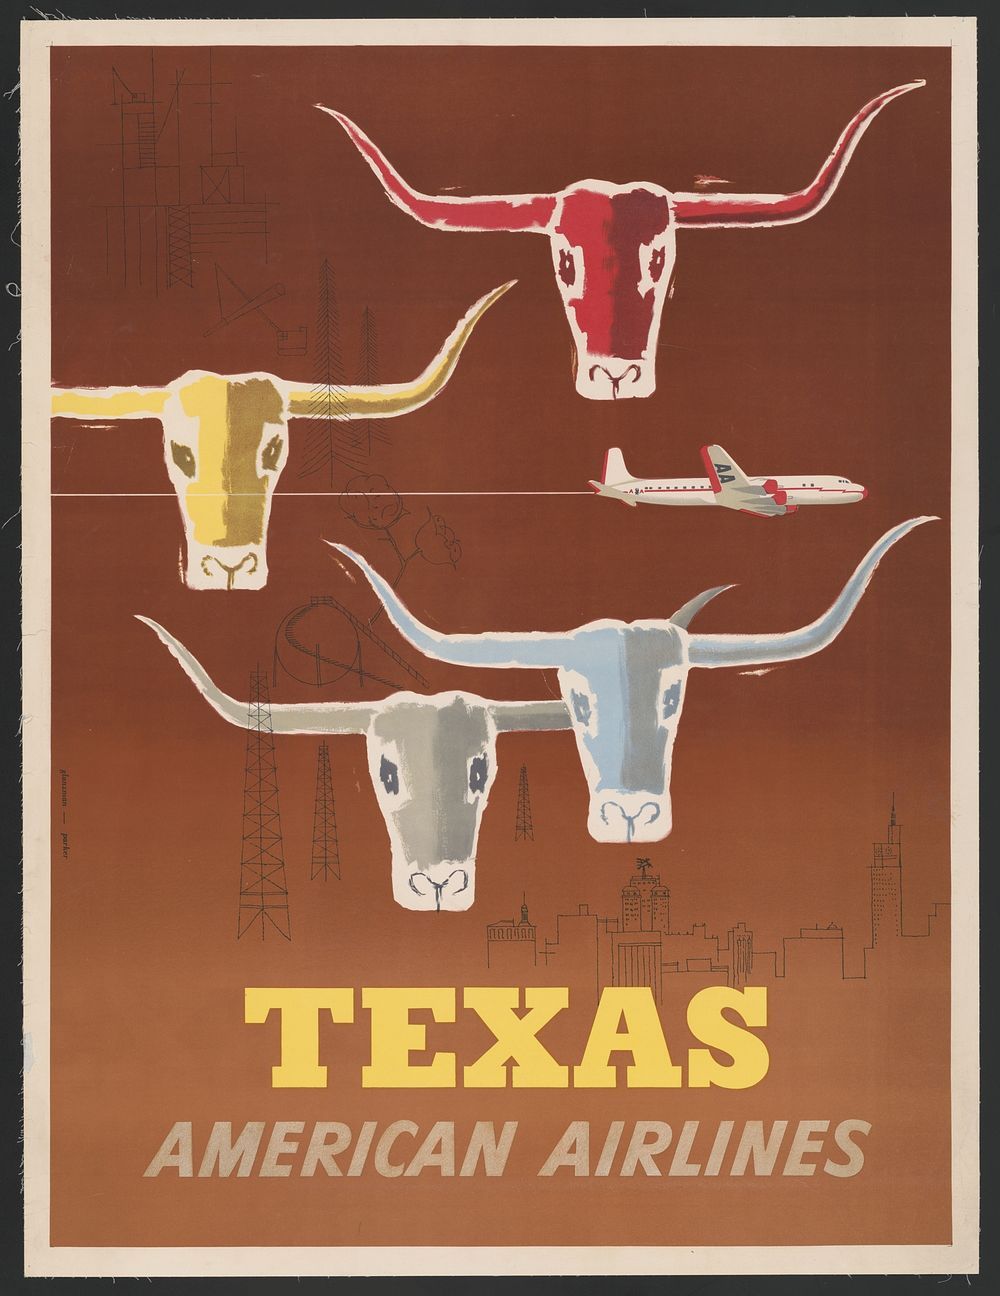 A poster advertising American Airlines flights to Texas, featuring three longhorns. - Longhorn